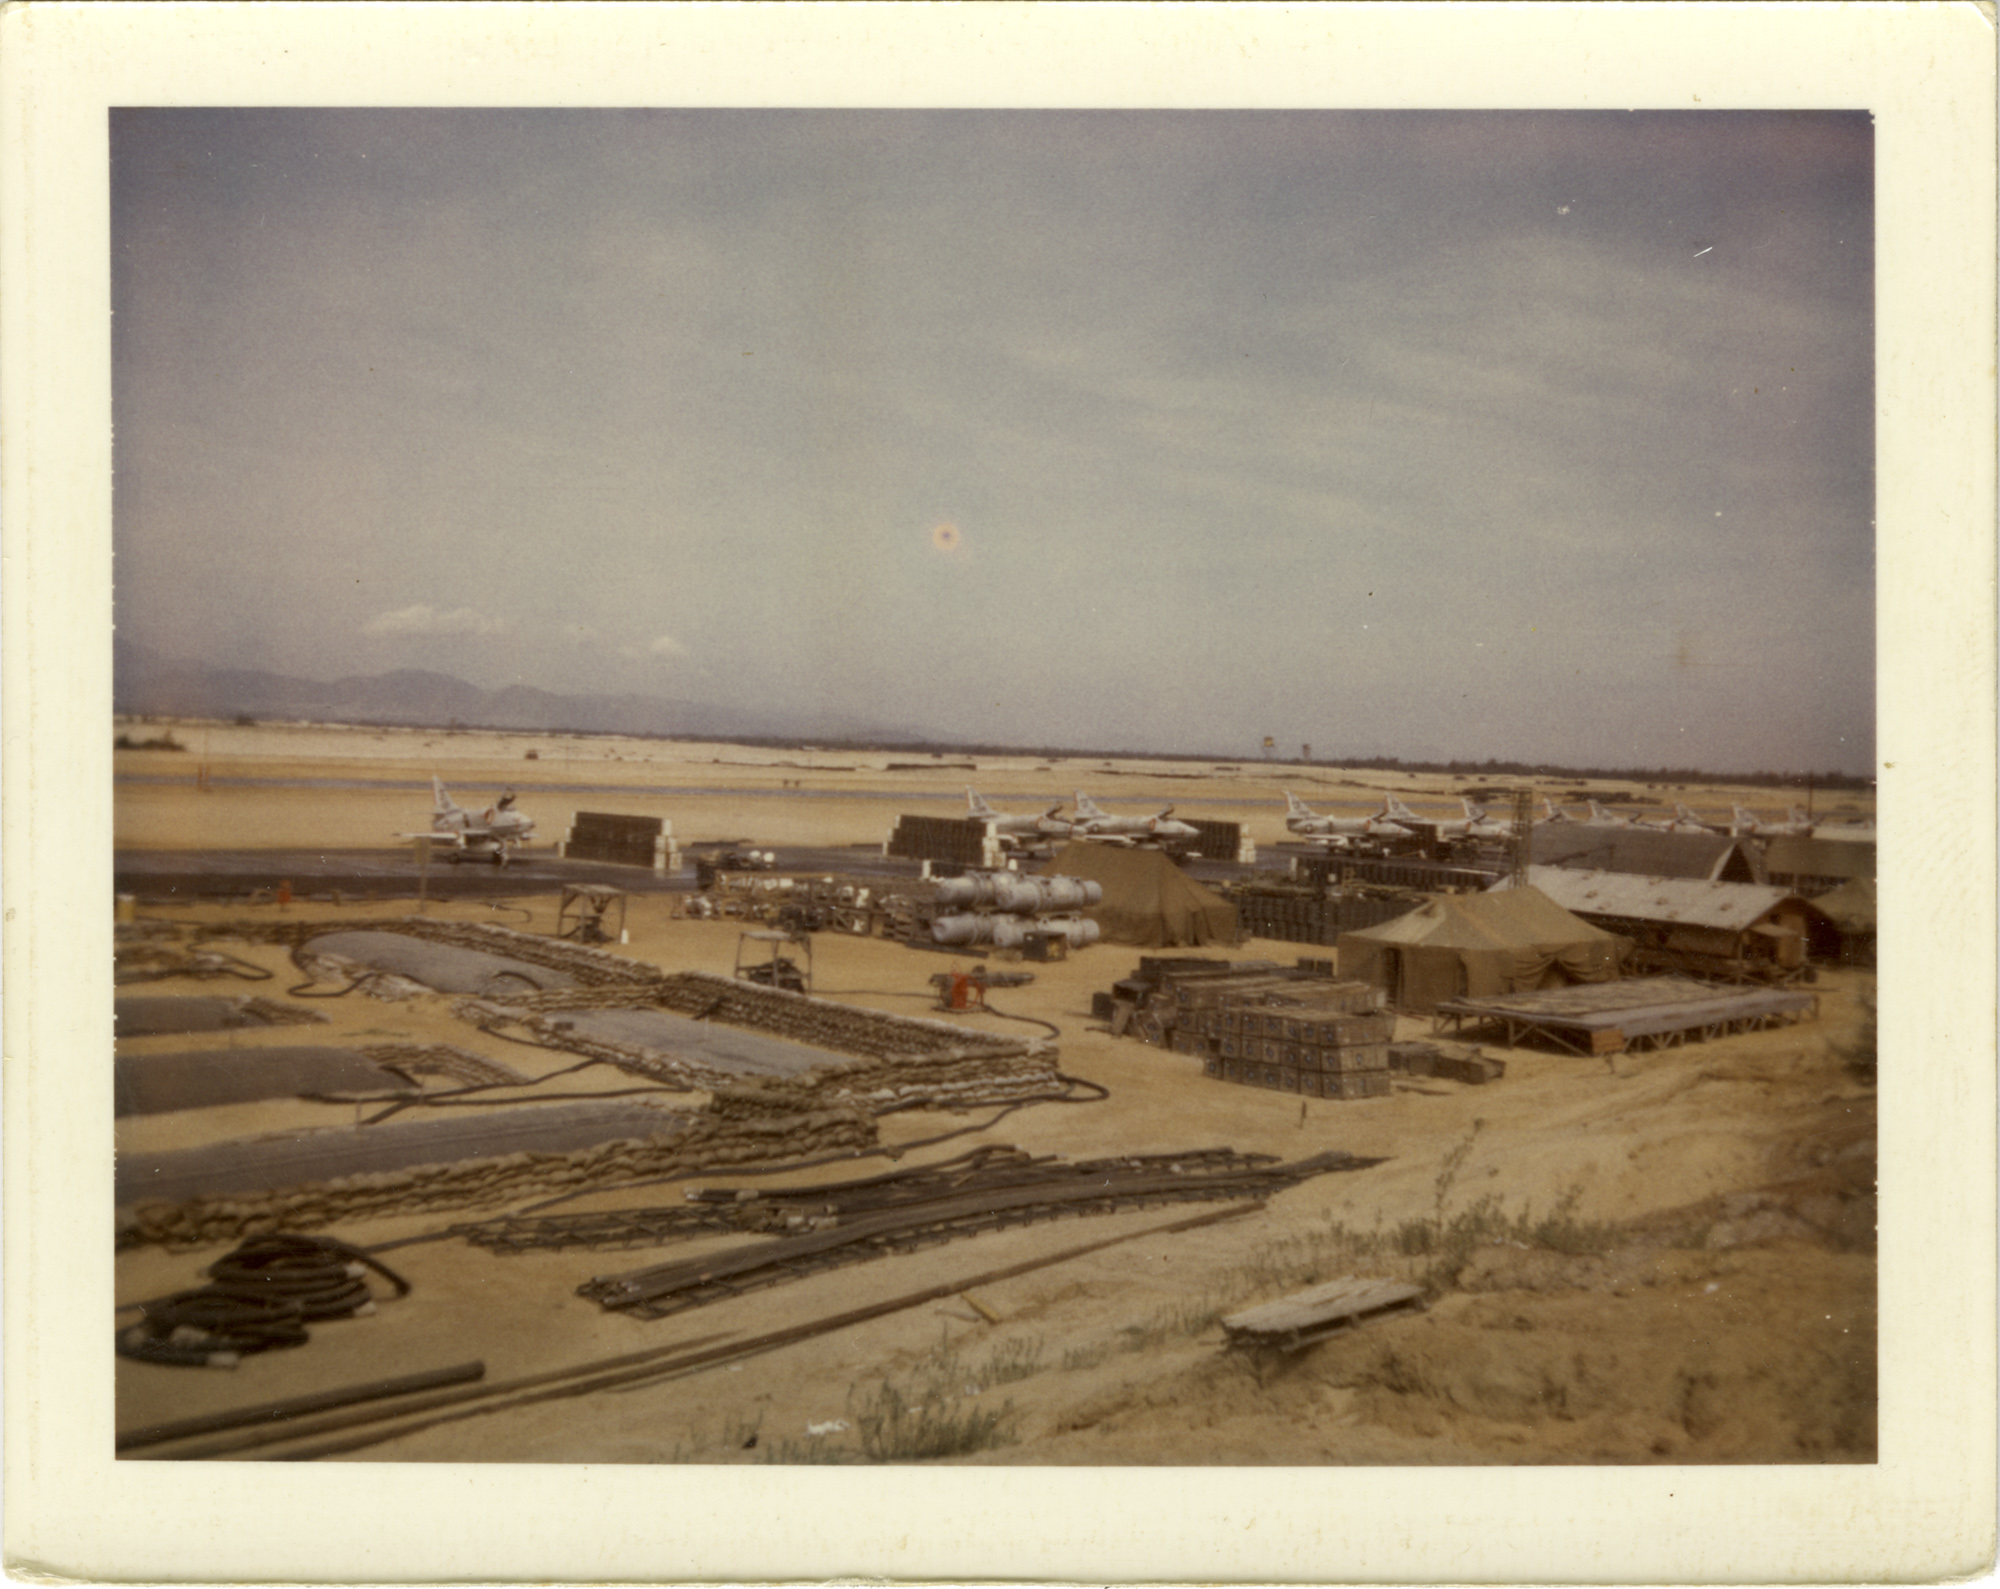 An air base surrounded by flat tan landscape and mountains in the far distance.